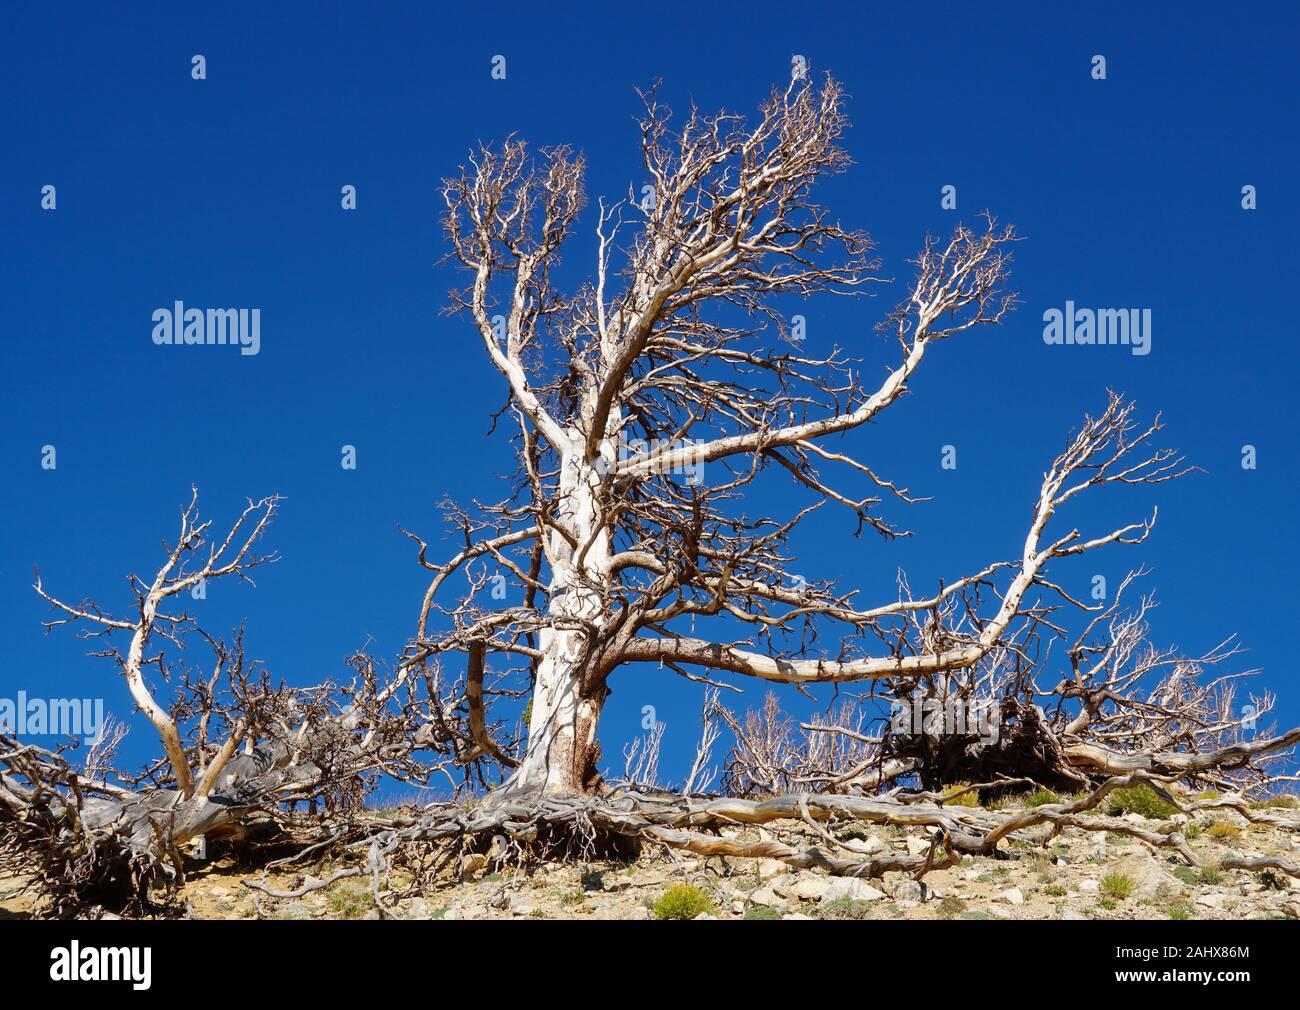 A barren tree stands proudly against a brilliant blue sky at the top of a mountain rise. Stock Photo